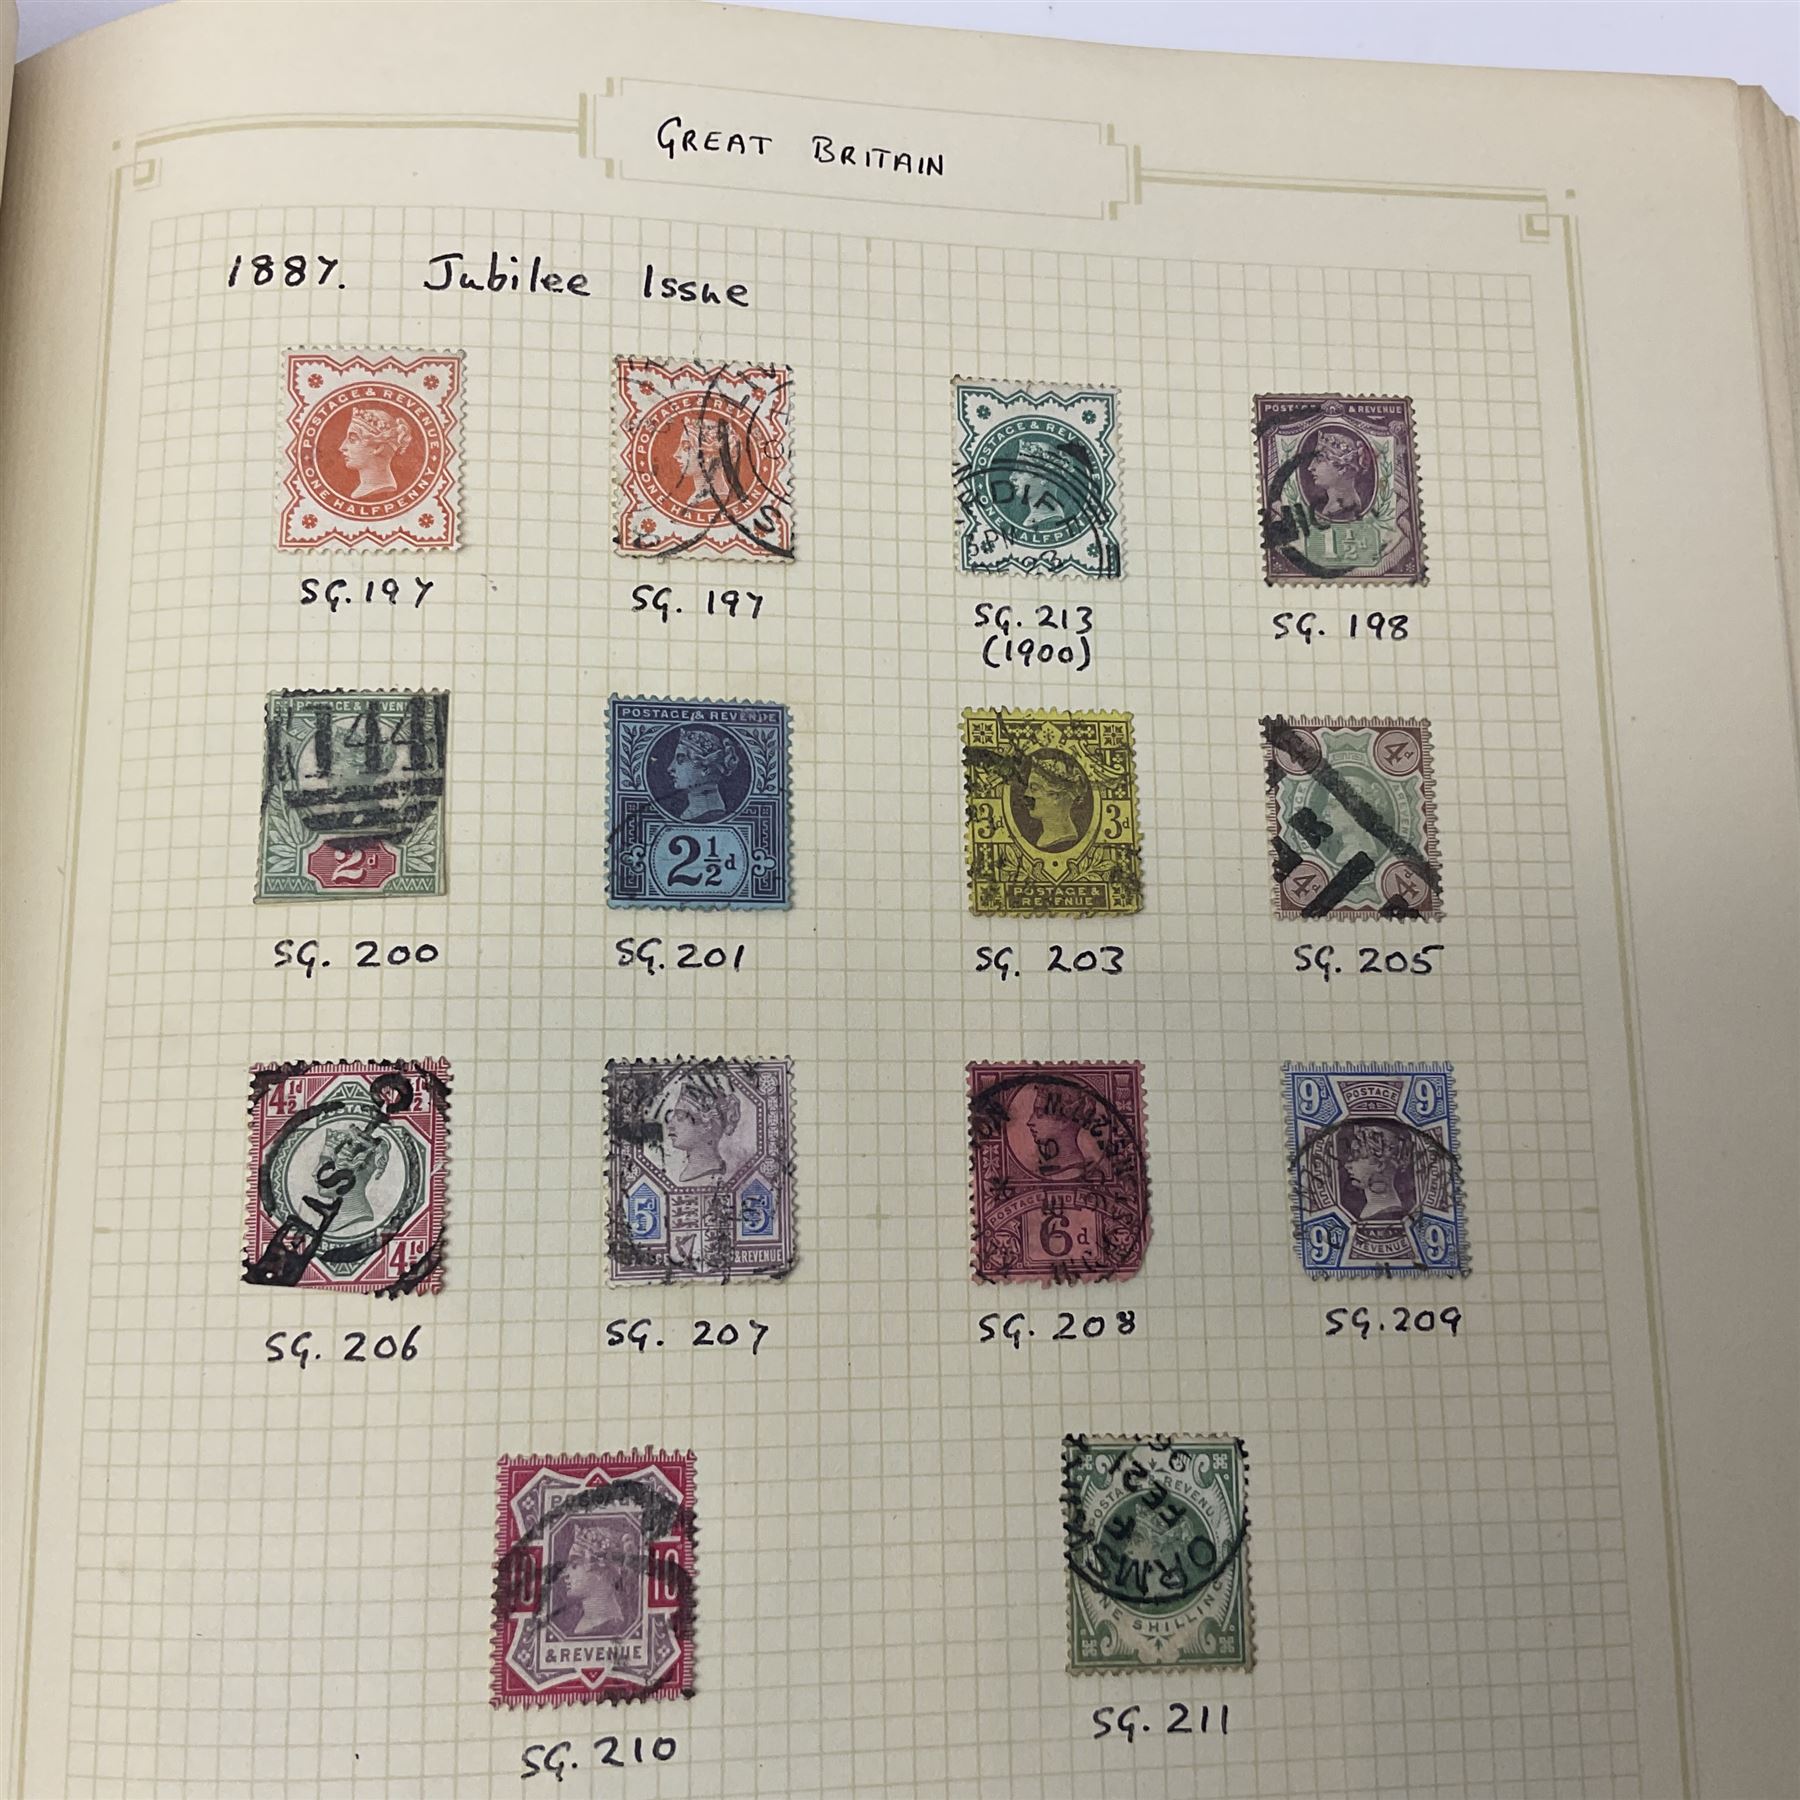 Queen Victoria and later Great British and World stamps - Image 6 of 25